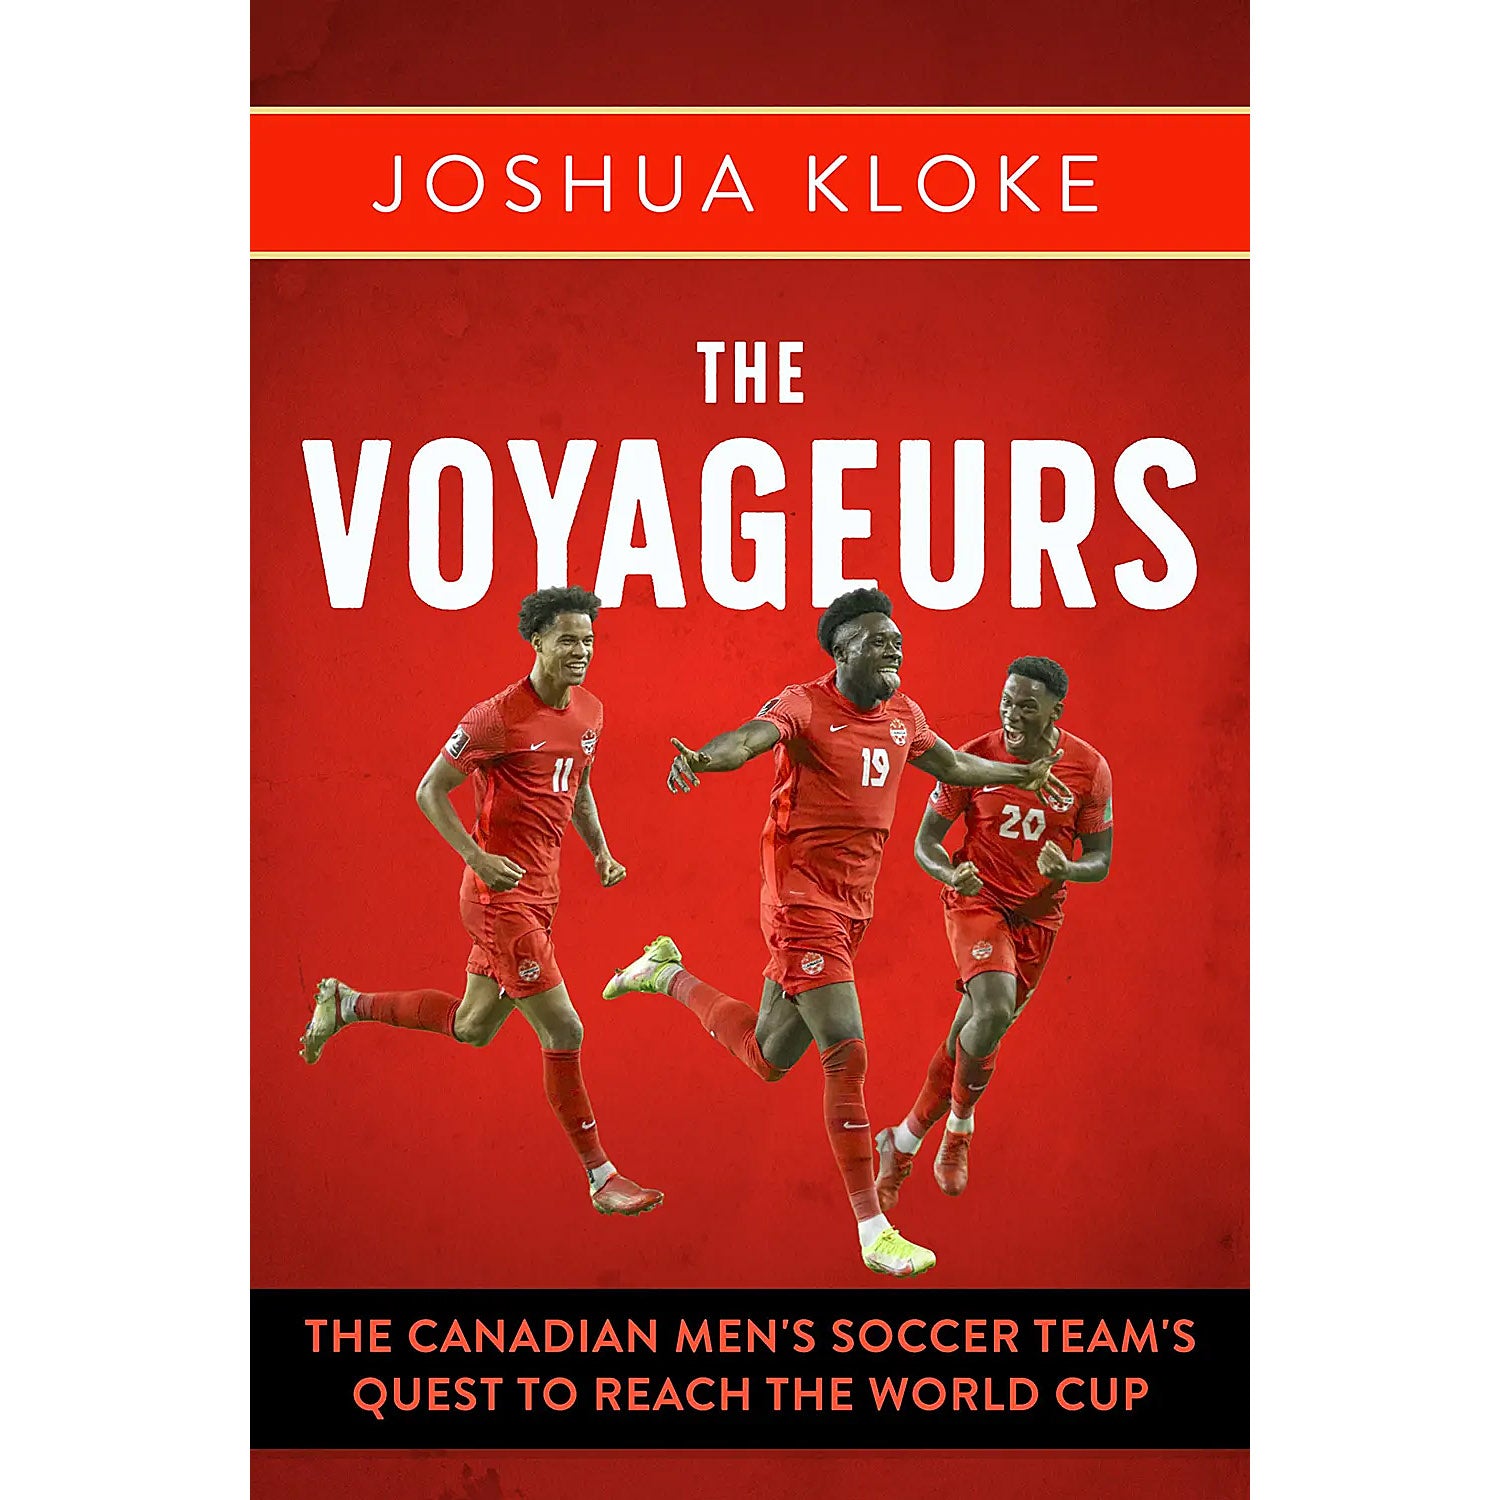 The Voyageurs – The Canadian Men's Soccer Team's Quest to Reach the World Cup